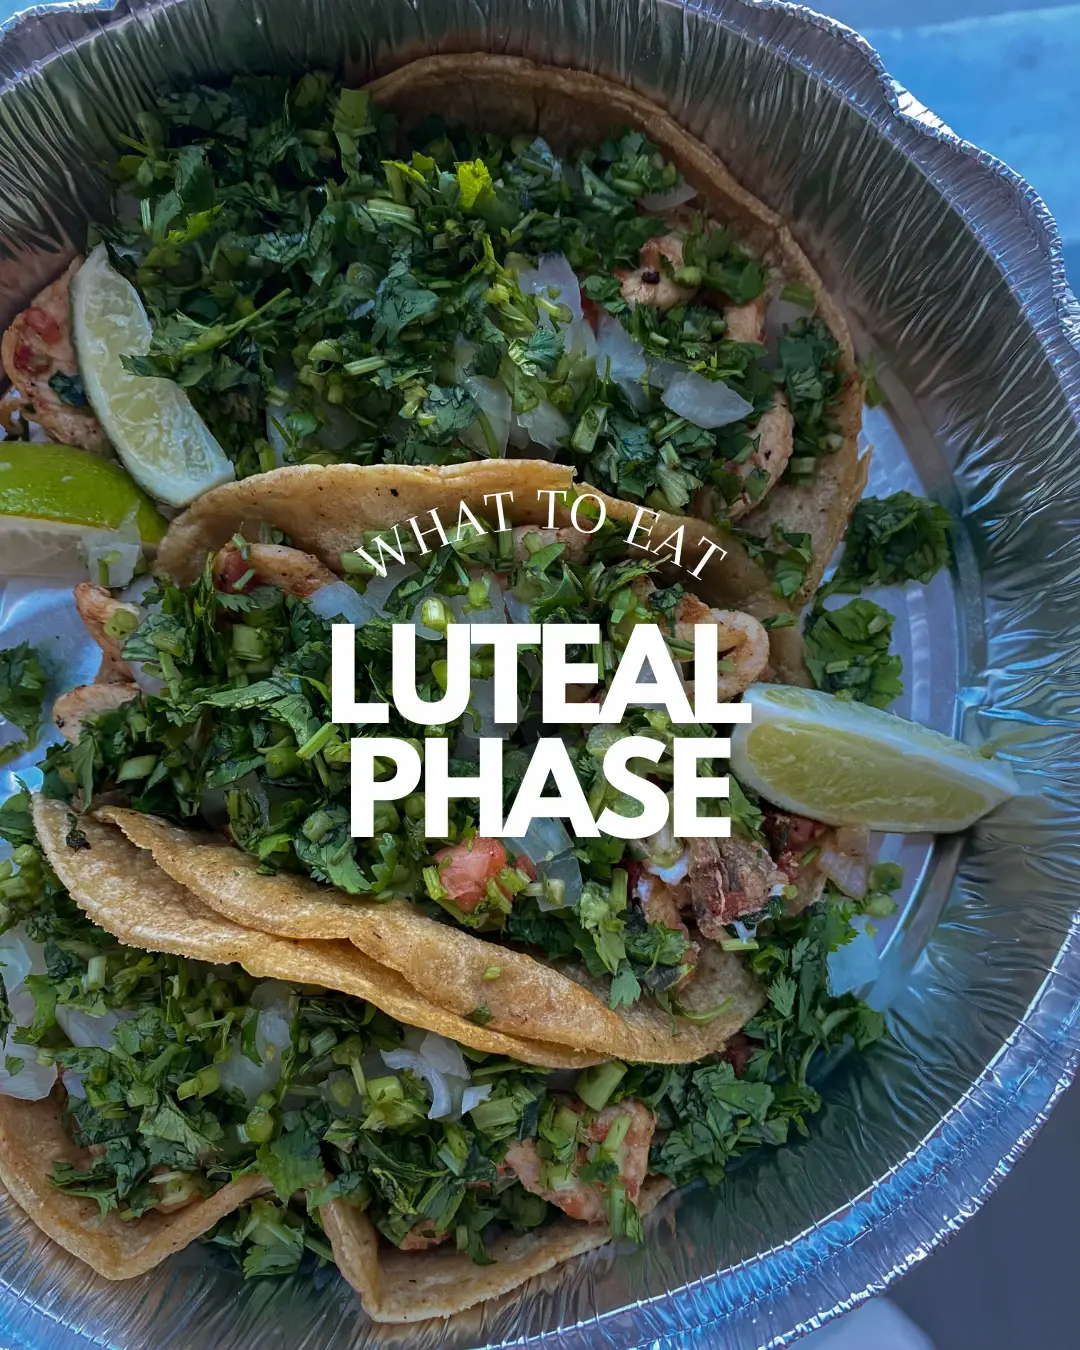 What to eat luteal phase - Lemon8 Search